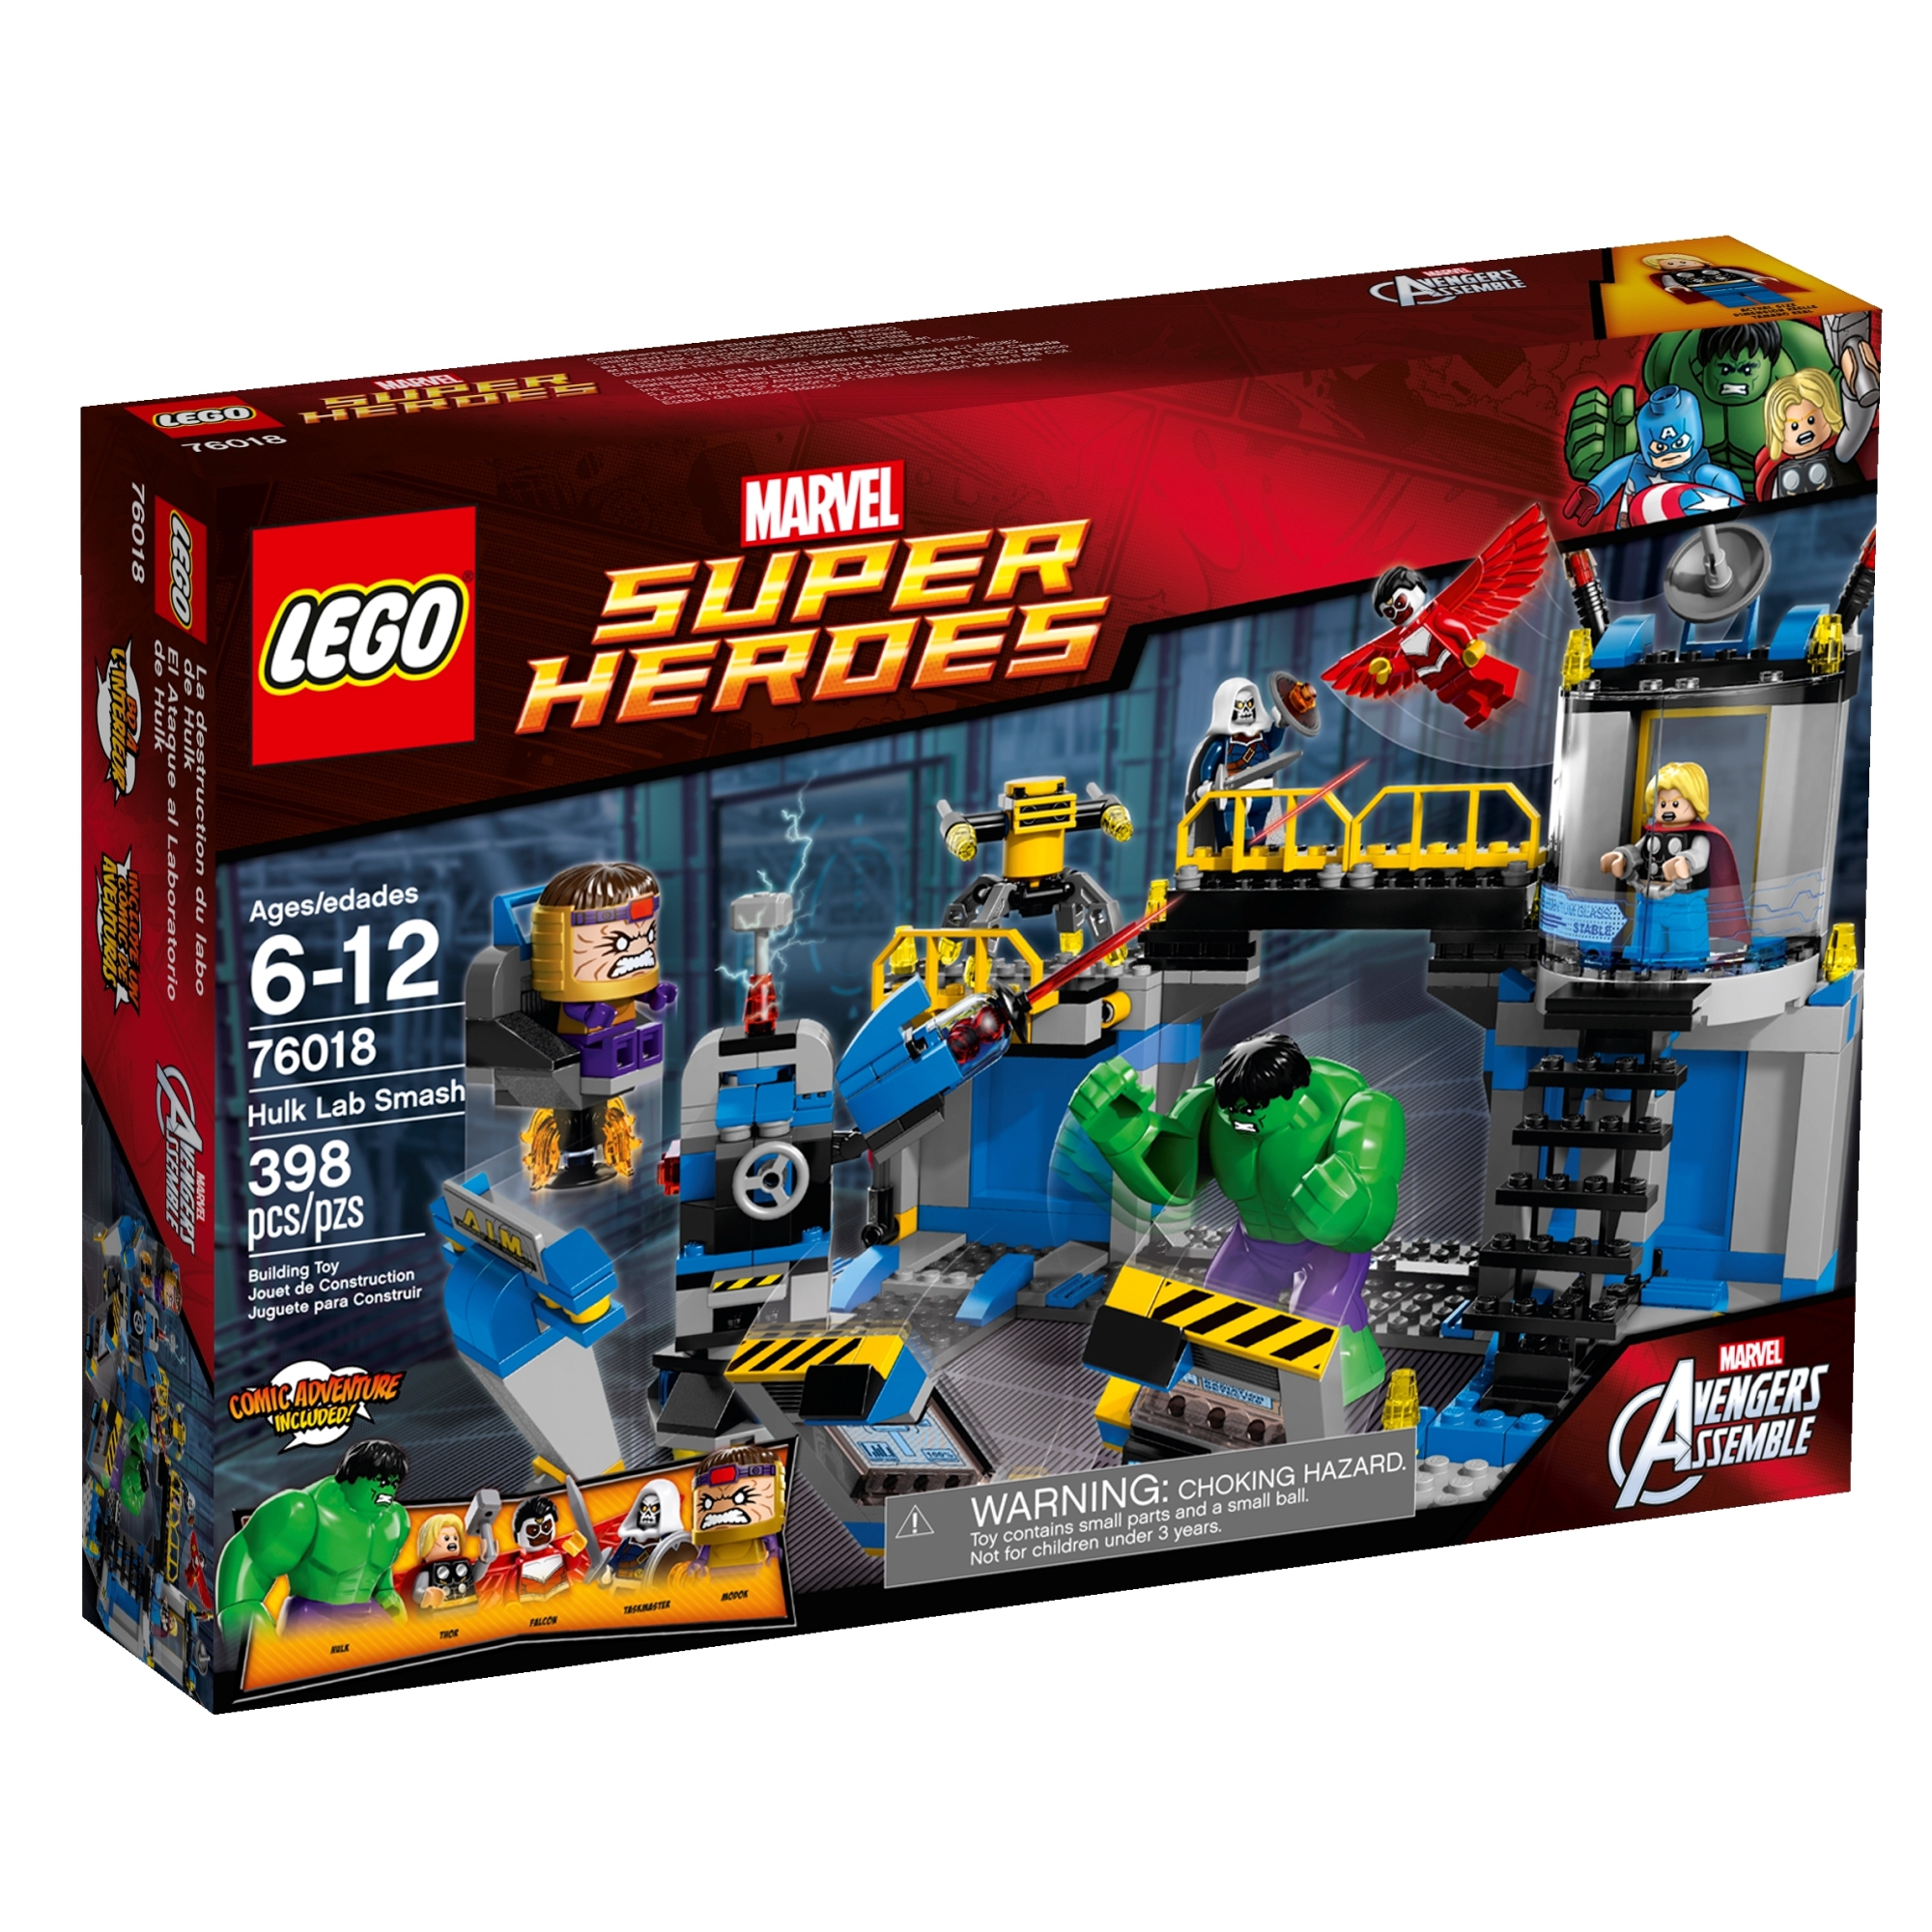 Bothans • View topic LEGO Marvel Super Hero Sets For 2014 Revealed |  Building Lego City Train Station